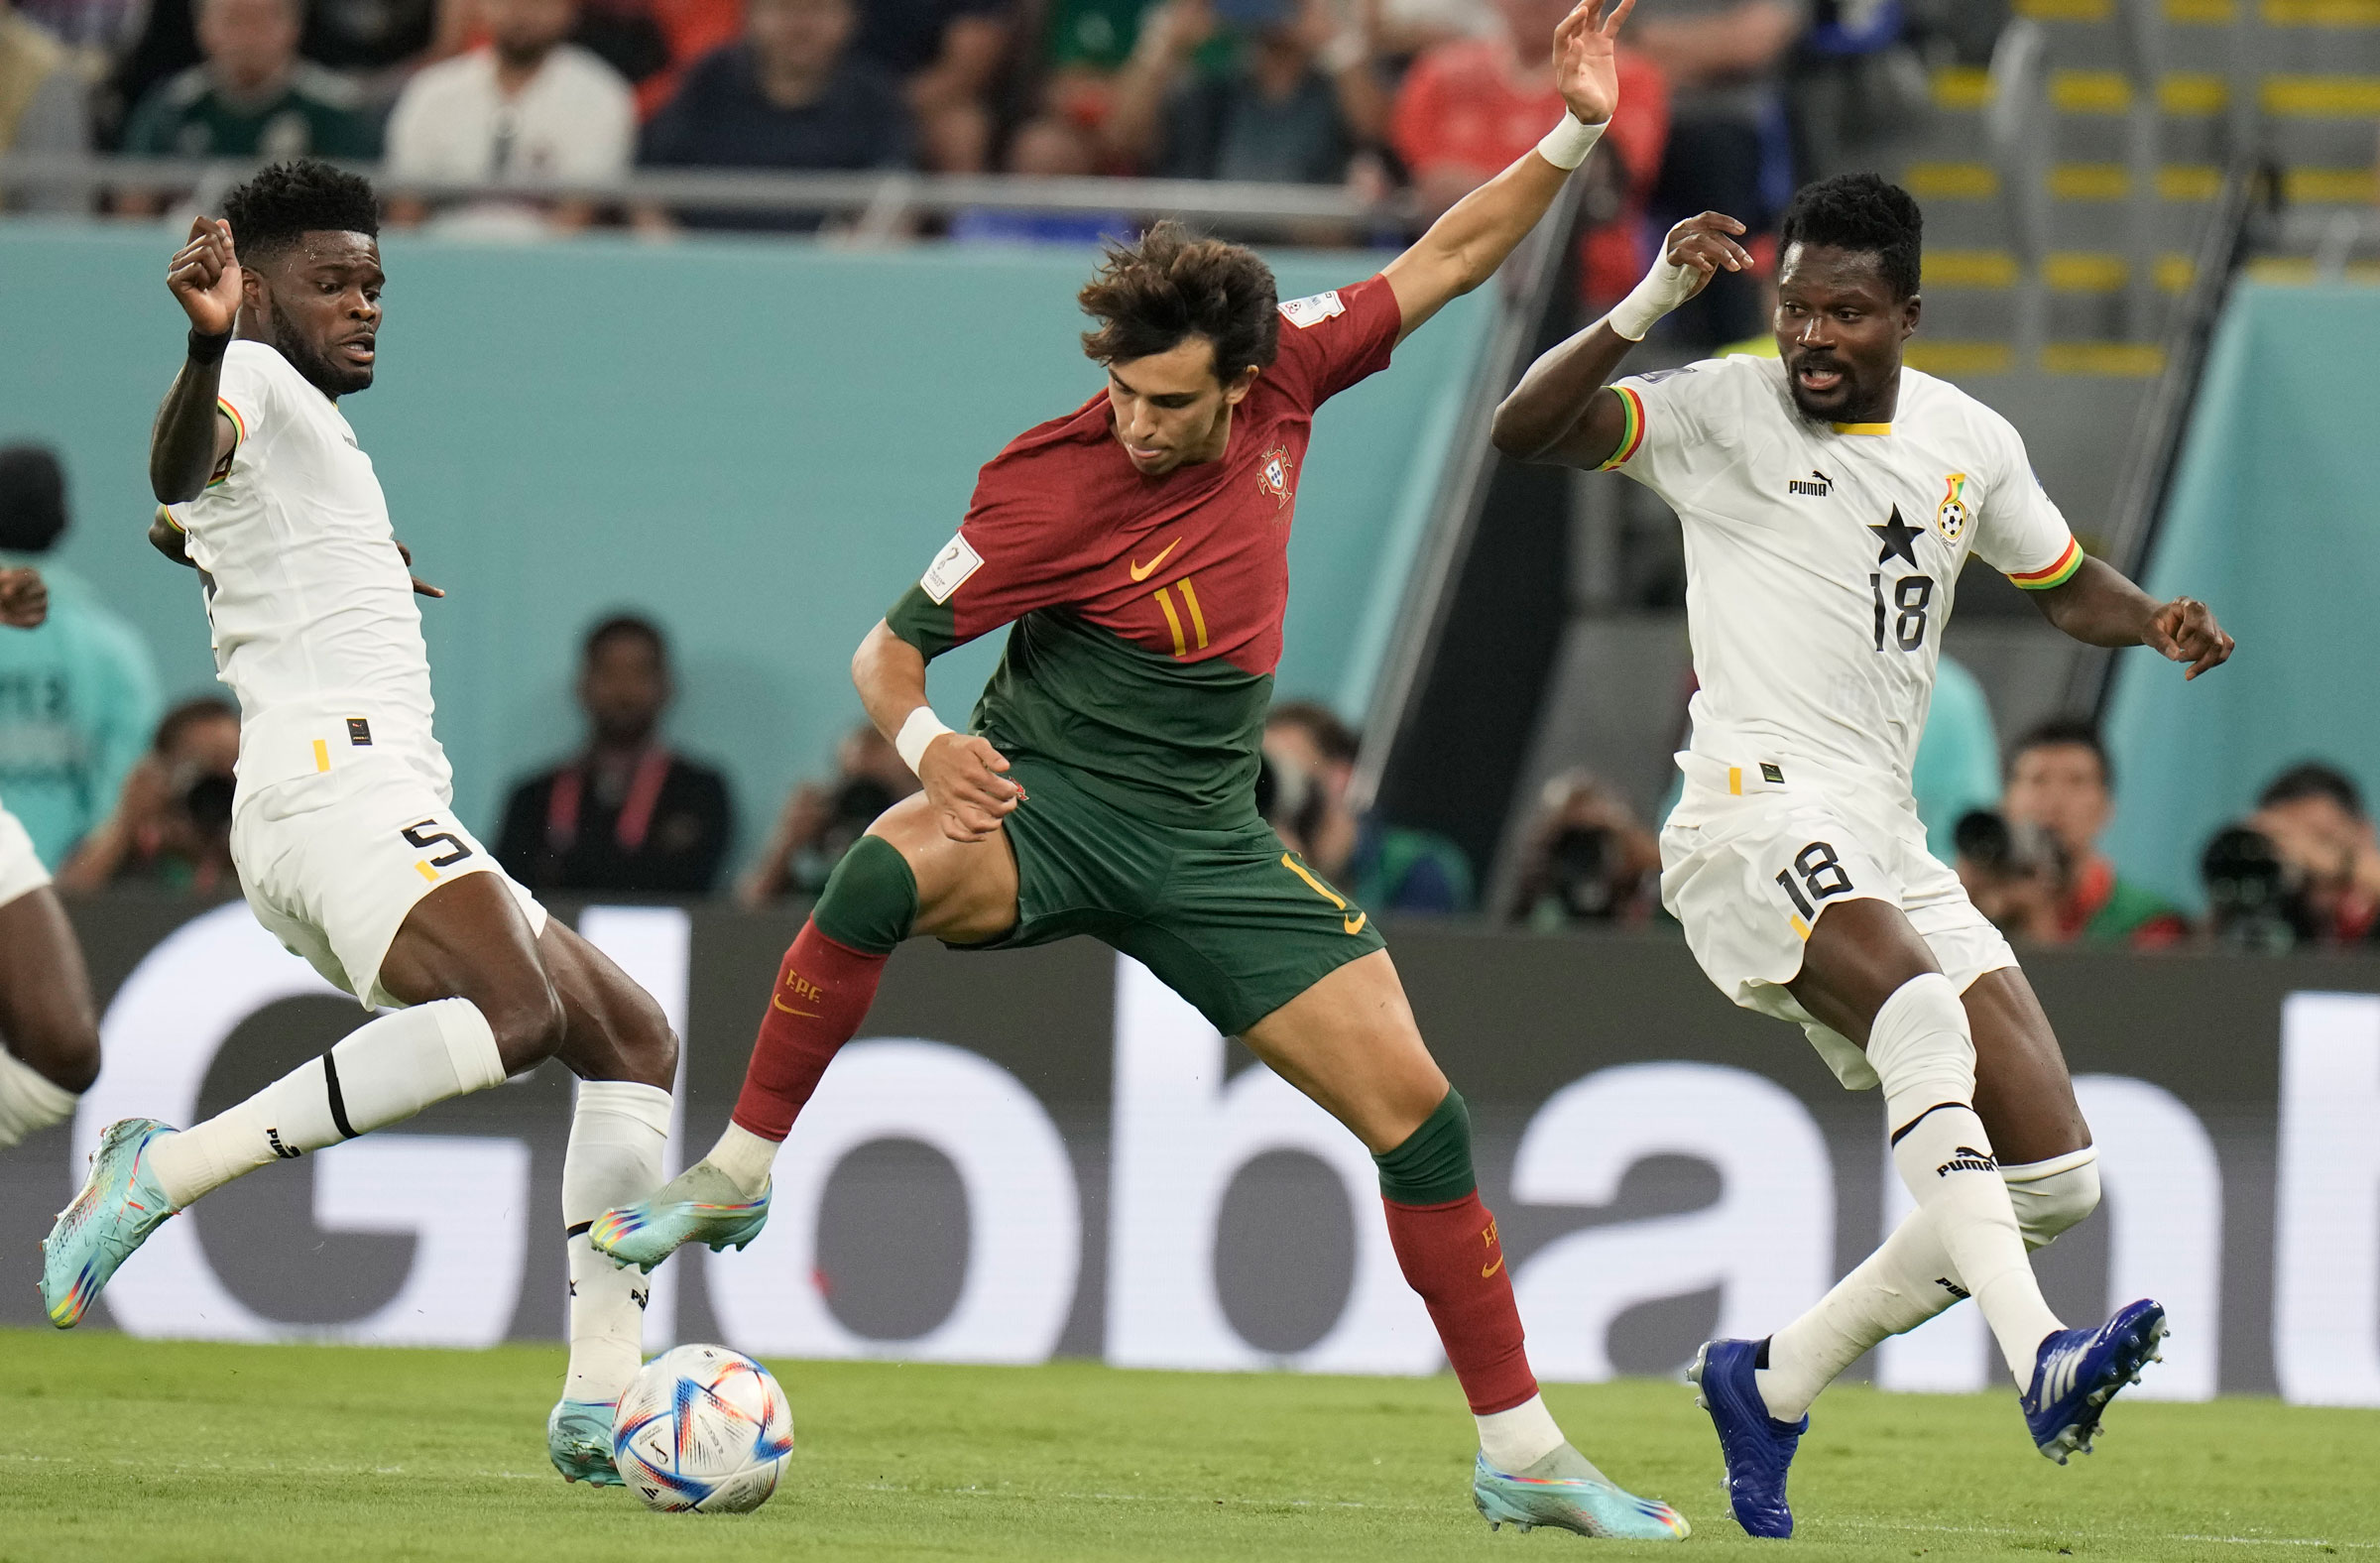 Portugal's Joao Felix is challenged for the ball by Ghana's Thomas Partey, left, and Daniel Amartey.